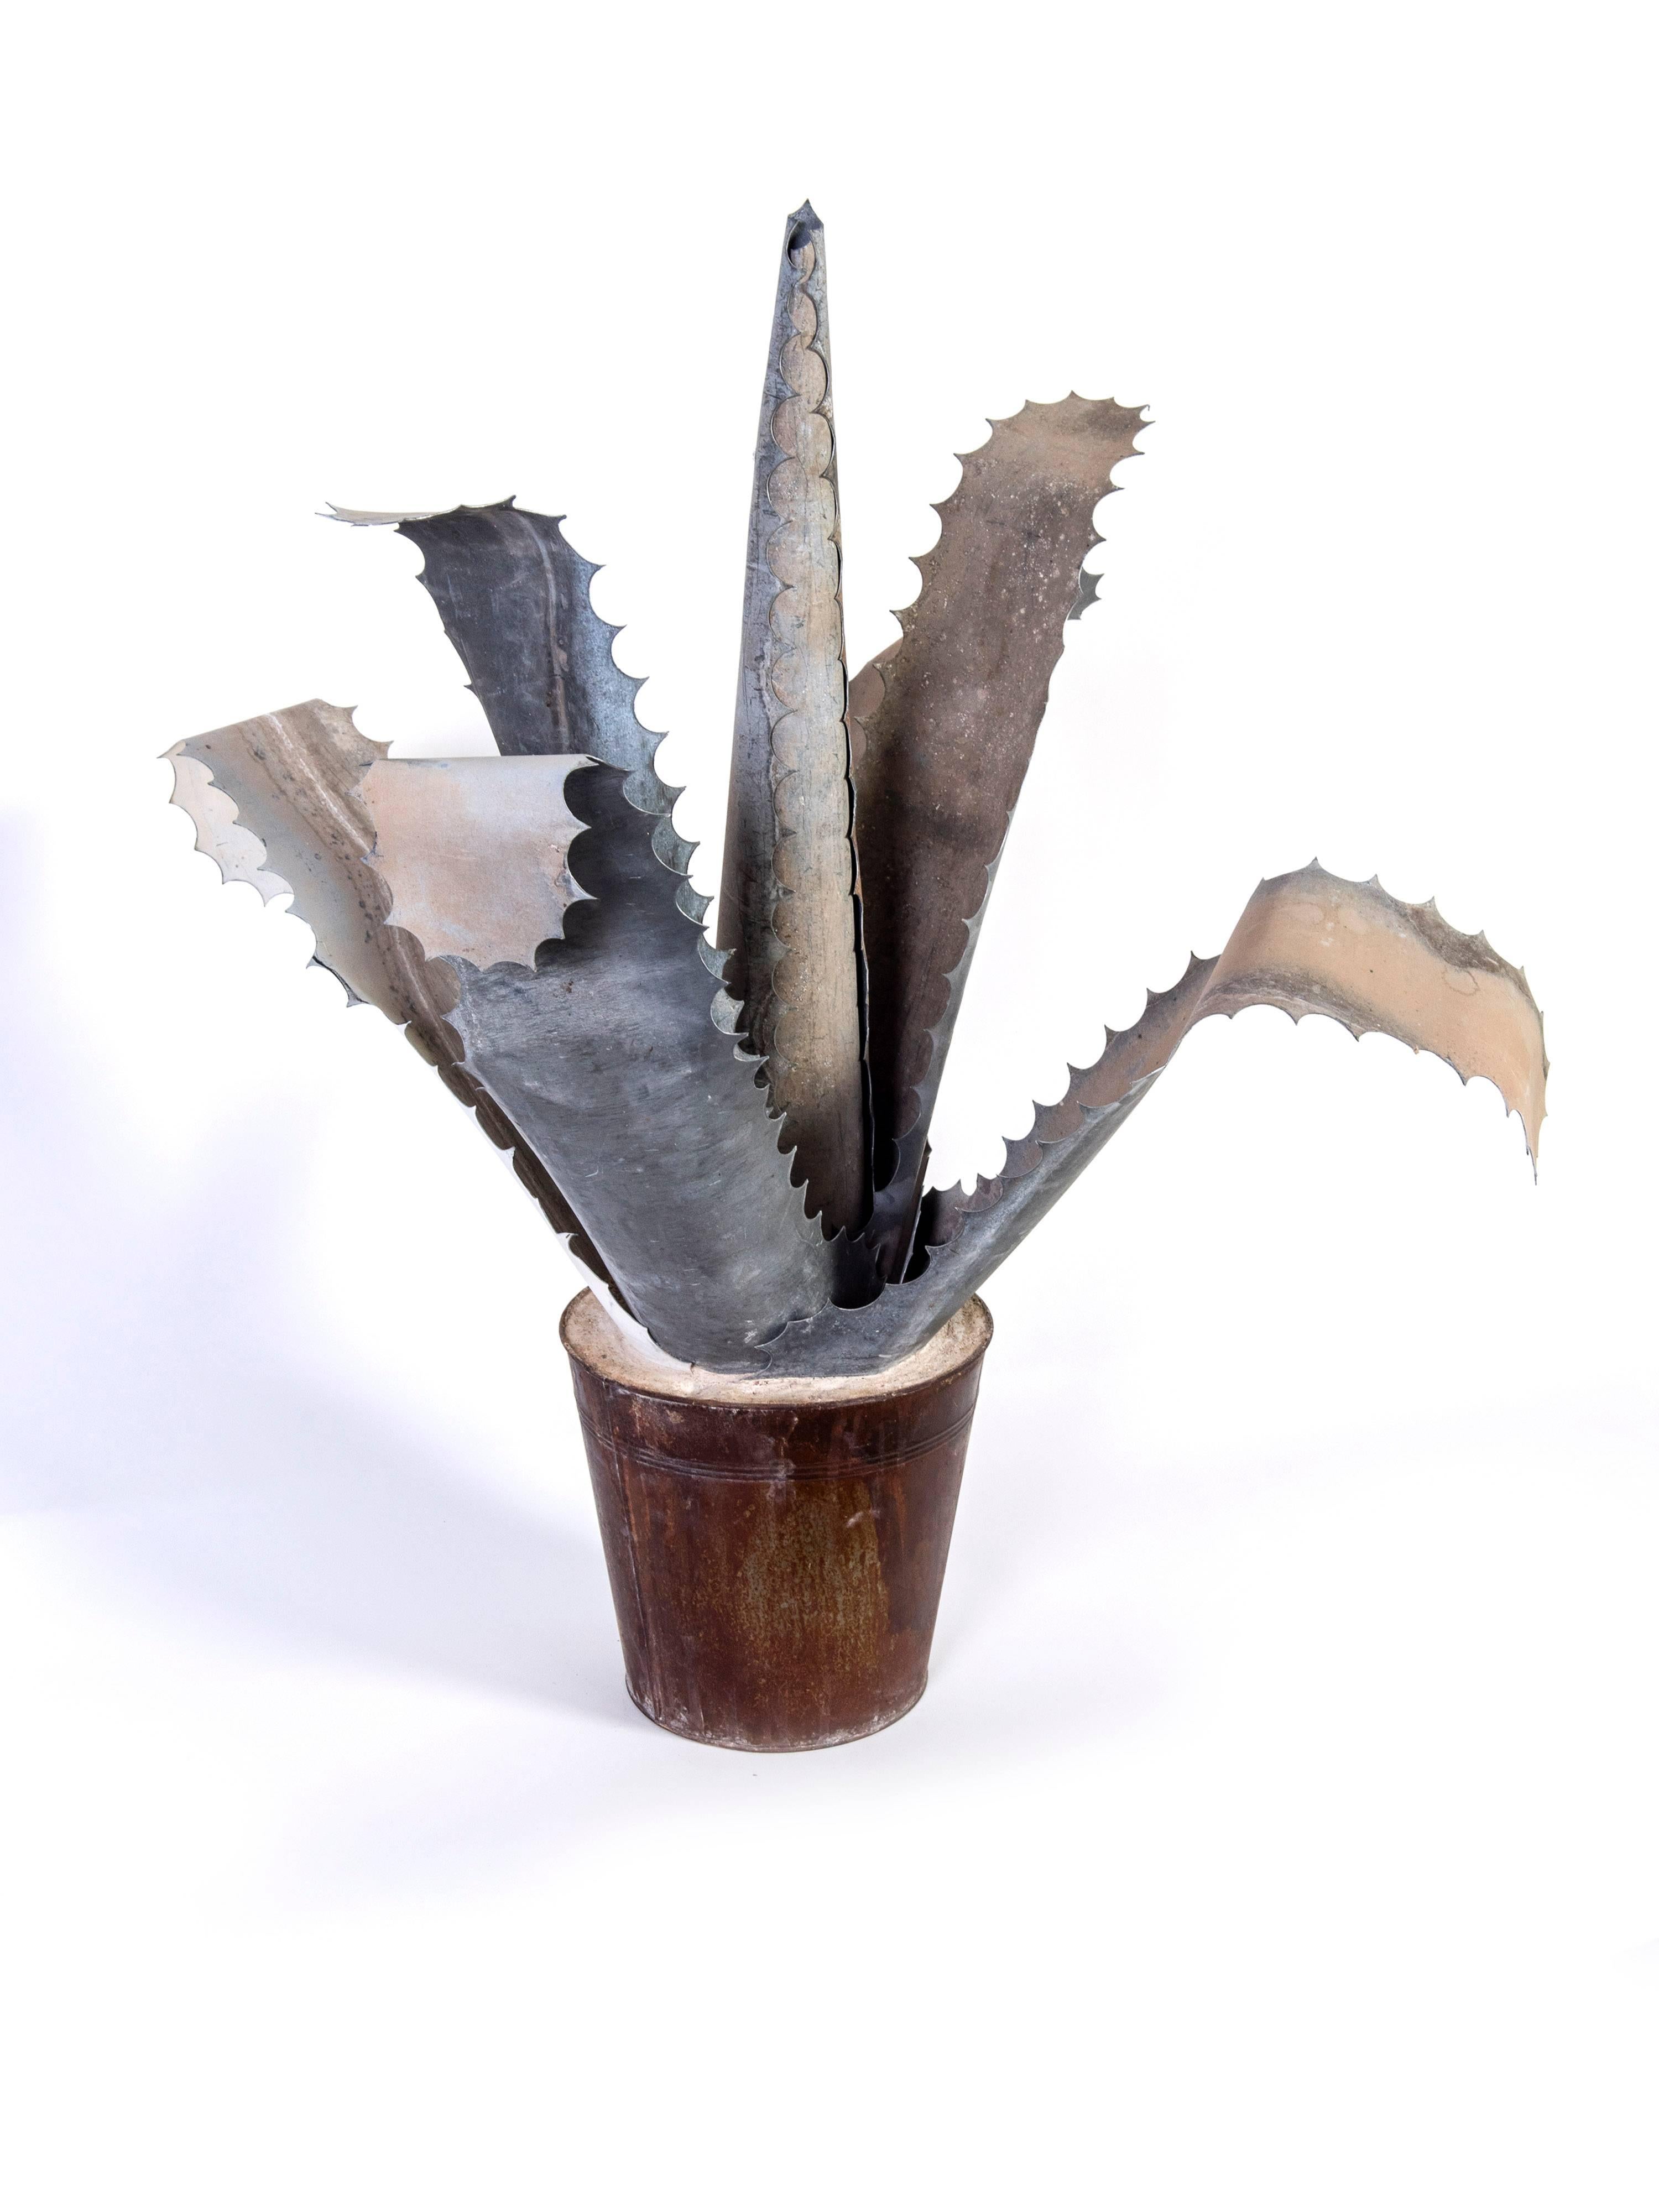 These are a very unusual and very decorative agave.
The  leave are made of Zinc sitting in a tin bucket filled with stone.
A rare find from a home in Paris.